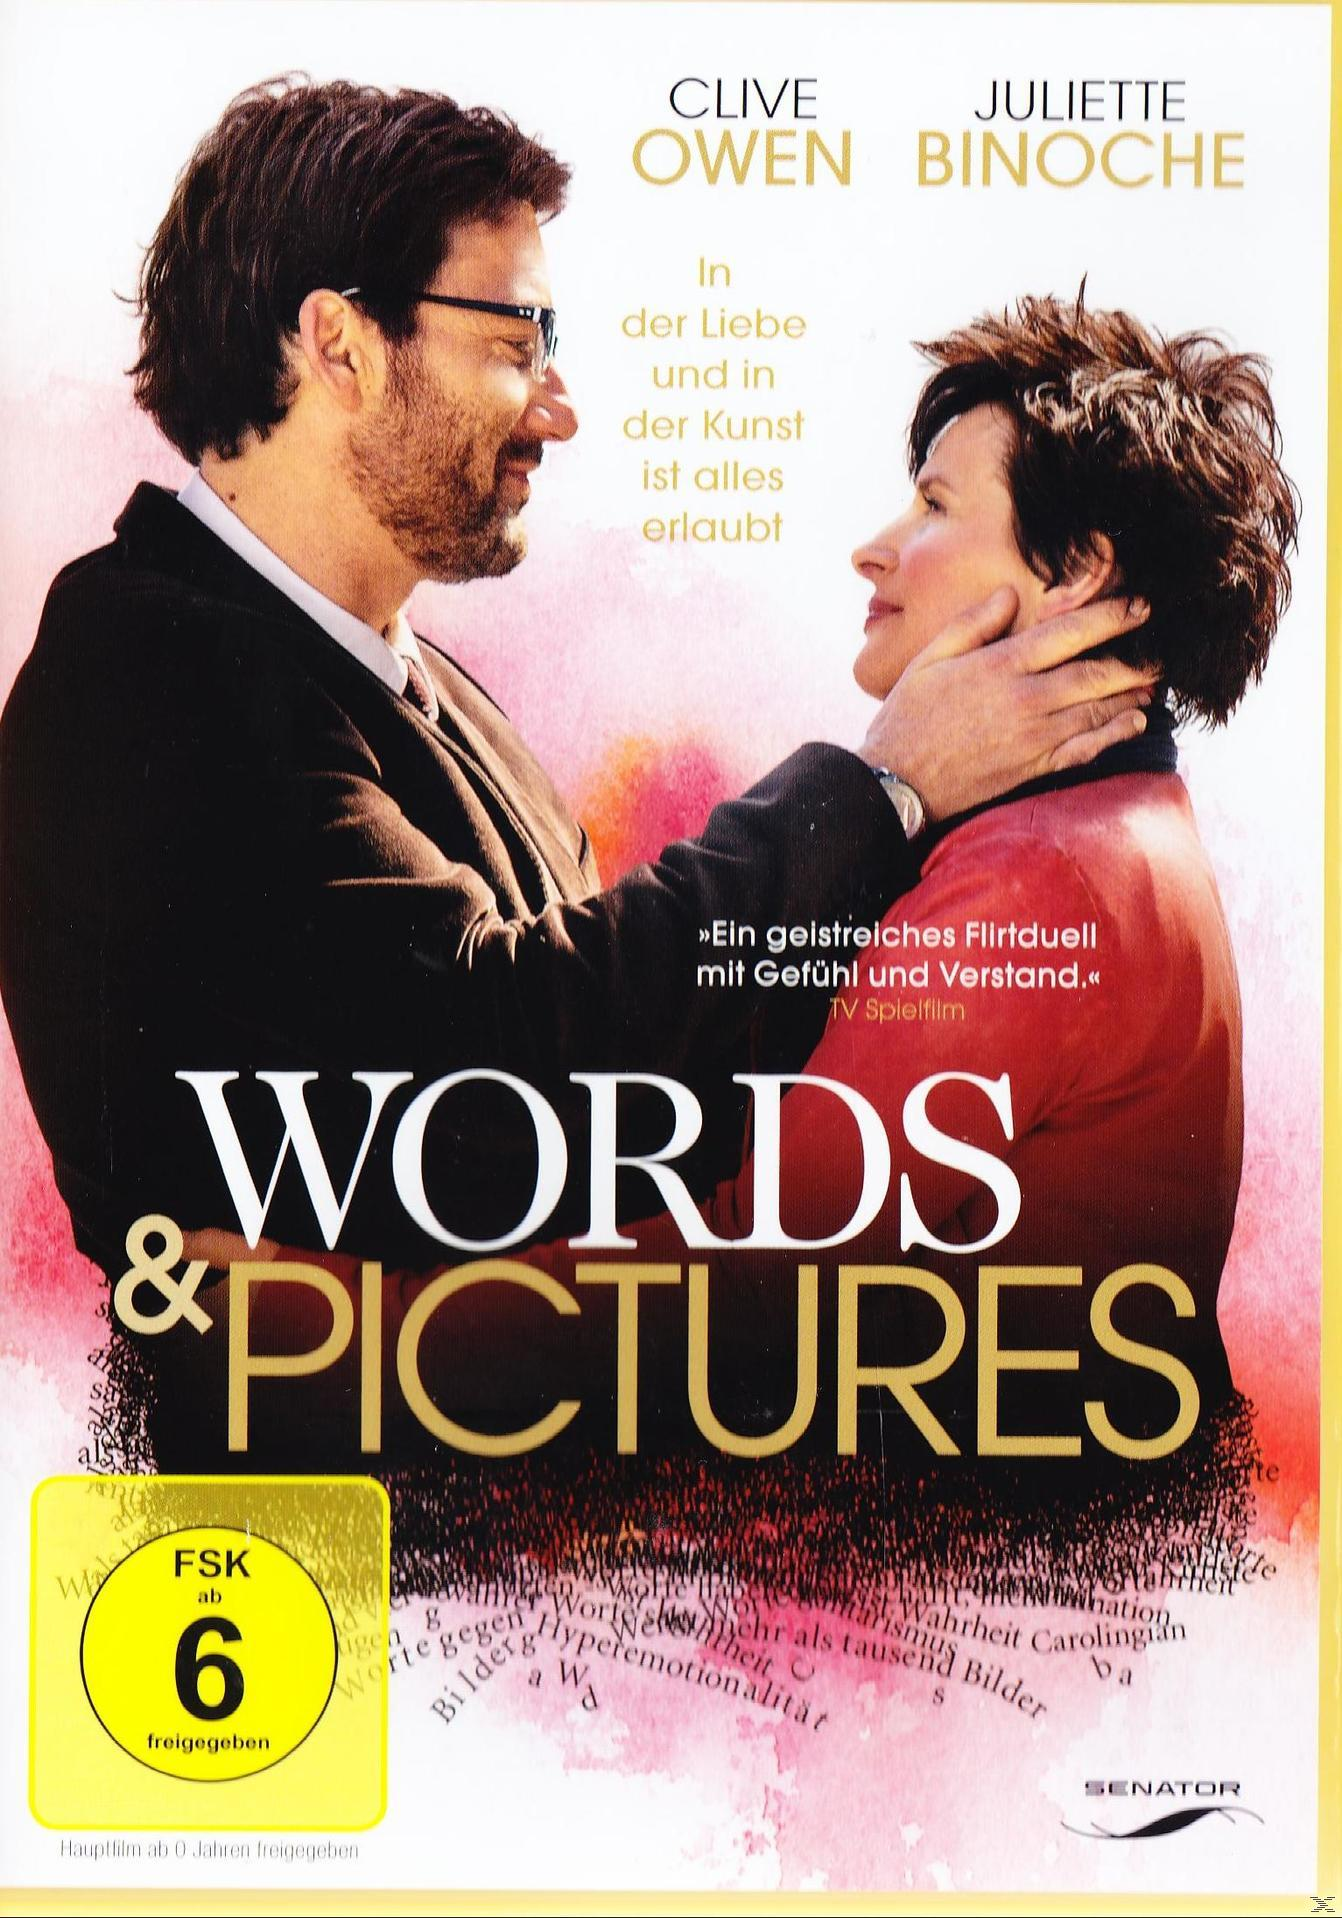 Words and DVD Liebe) Pictures (Alles